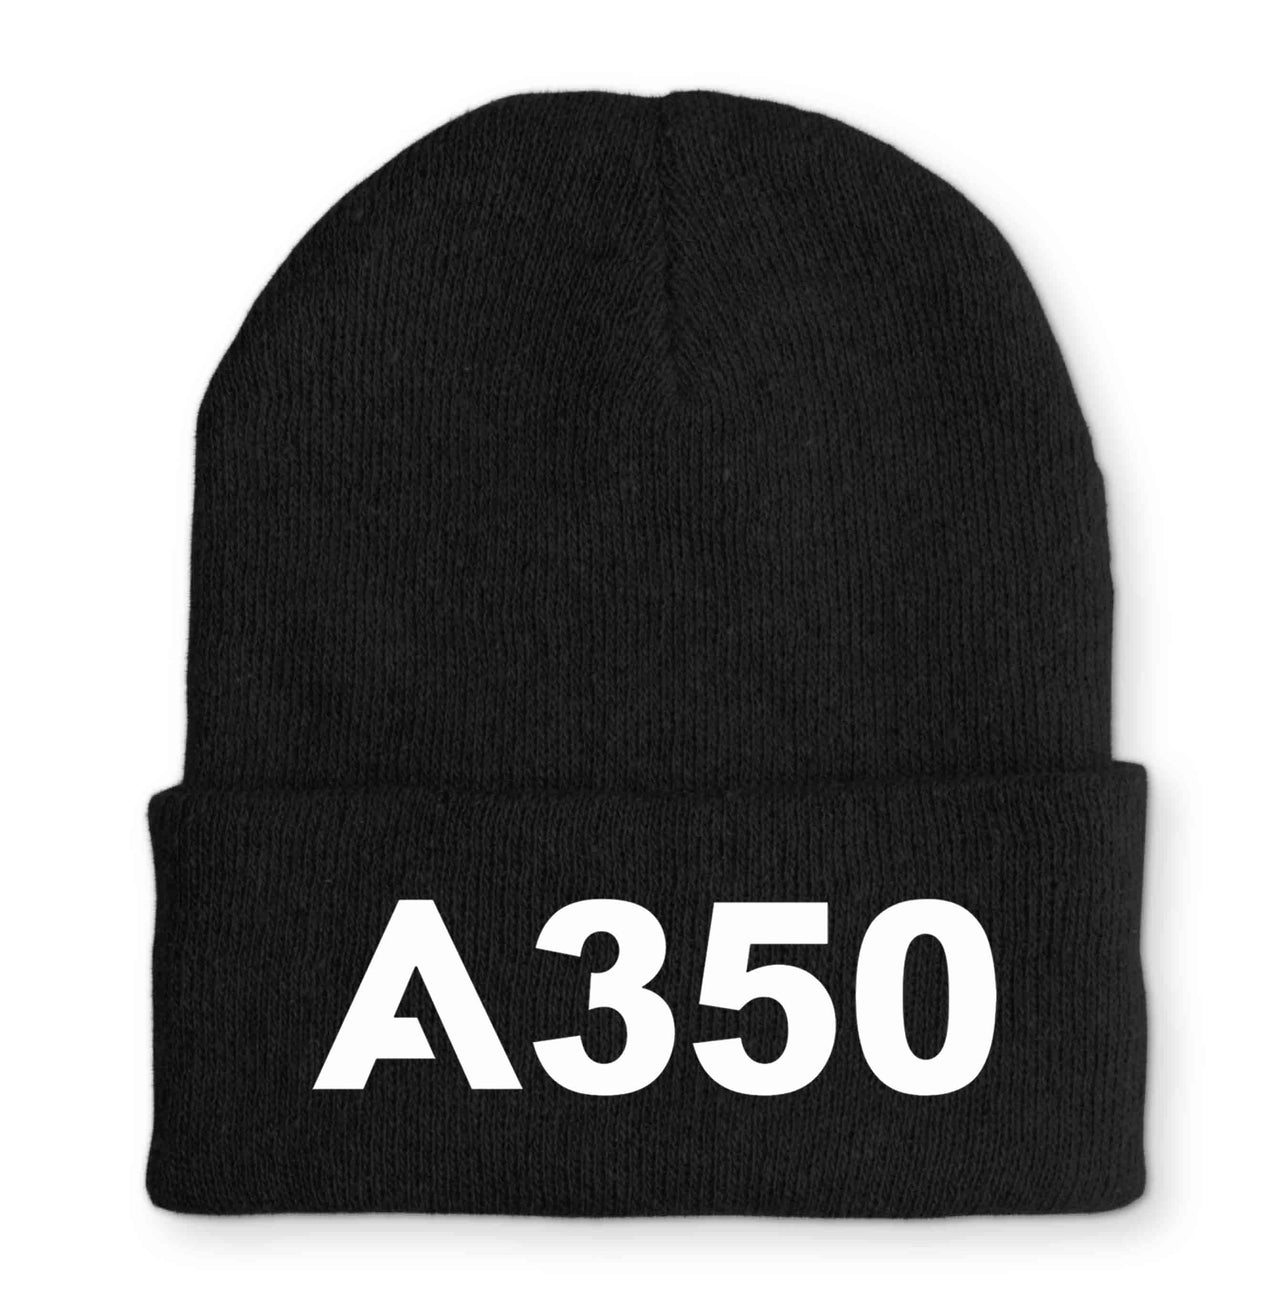 A350 Flat Text Embroidered Beanies